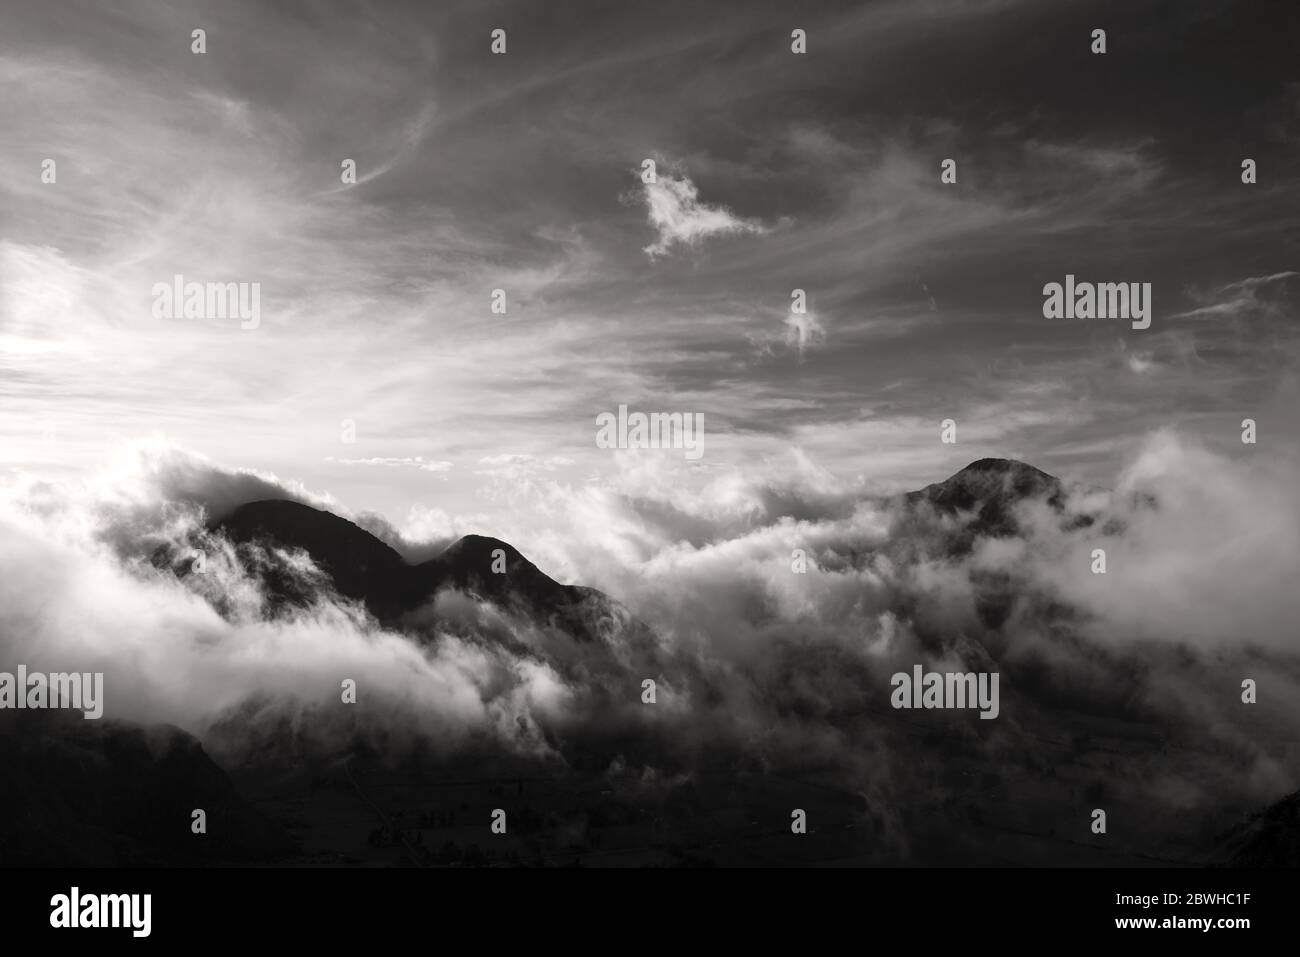 The Andes mountain range towering above the clouds in black and white. Stock Photo